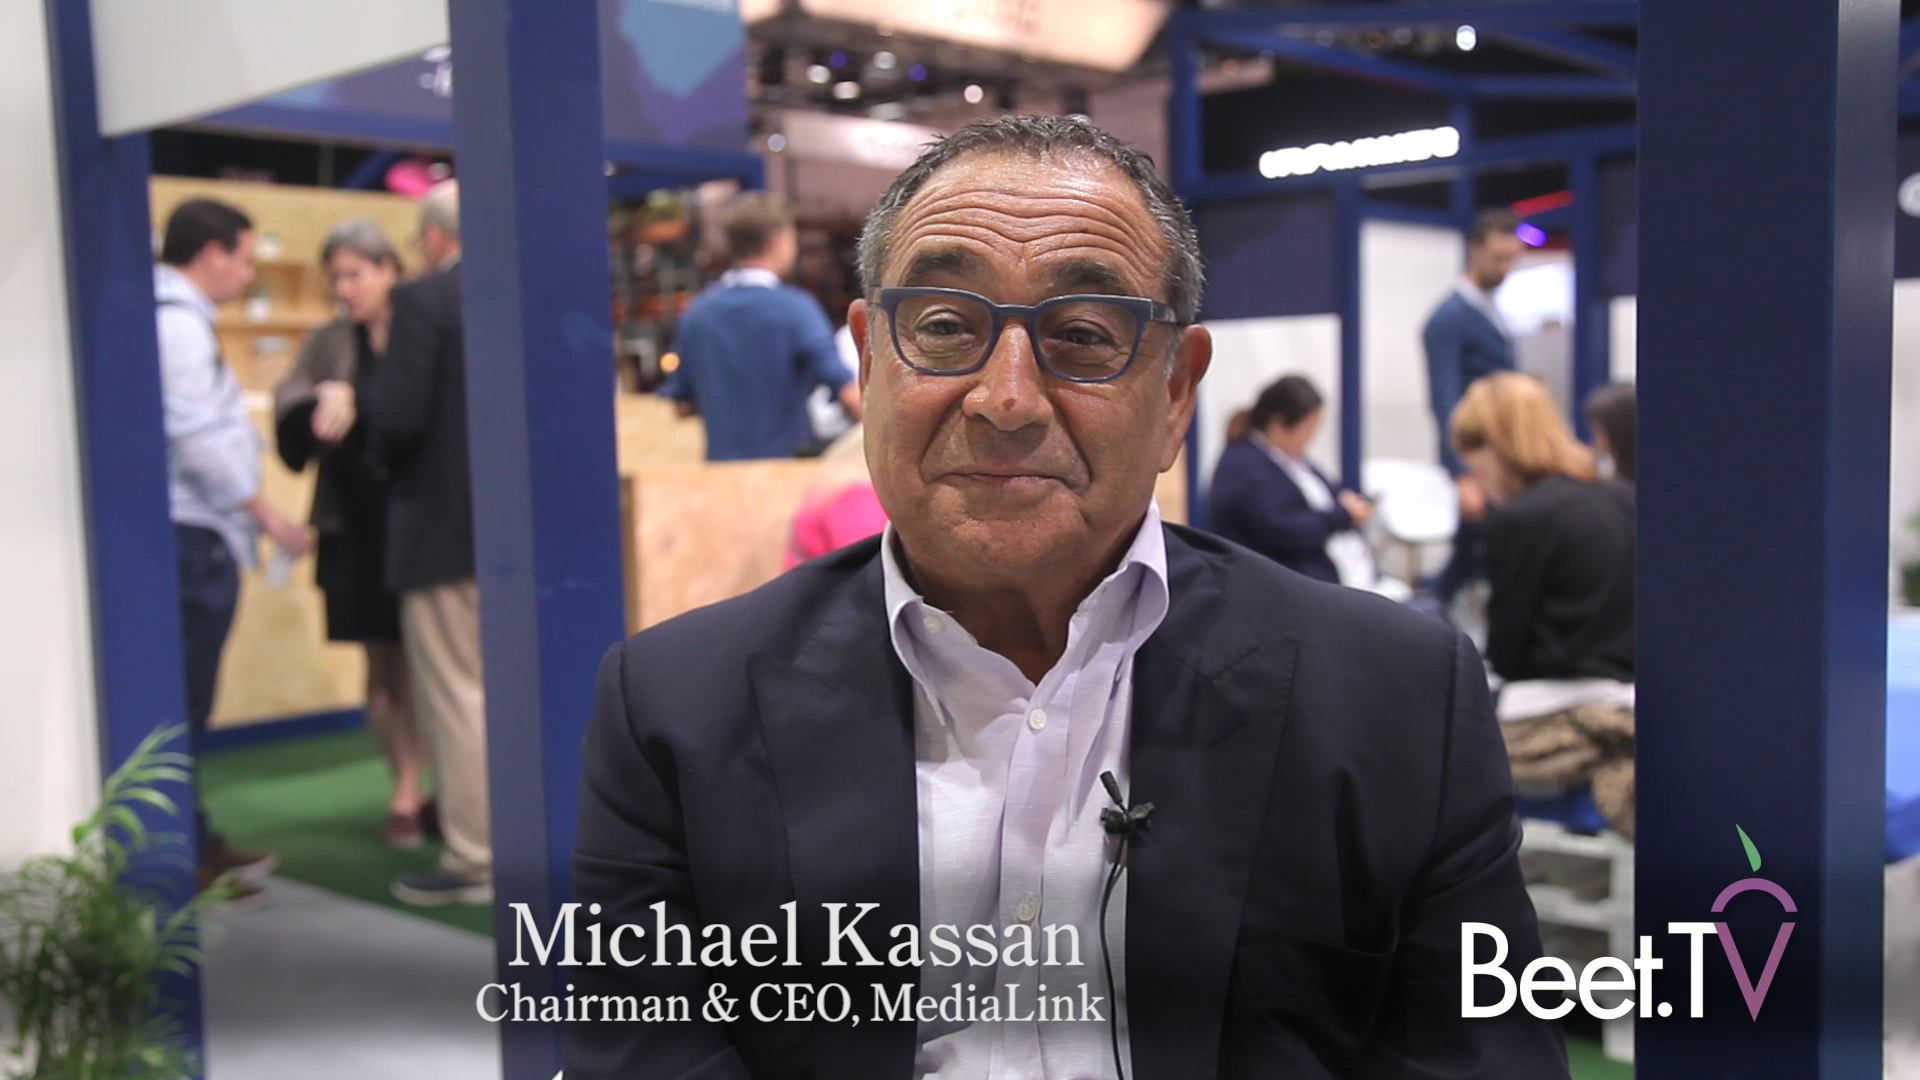 MediaLink’s Kassan Seeks Global Scale Amid ‘Controlled Chaos’